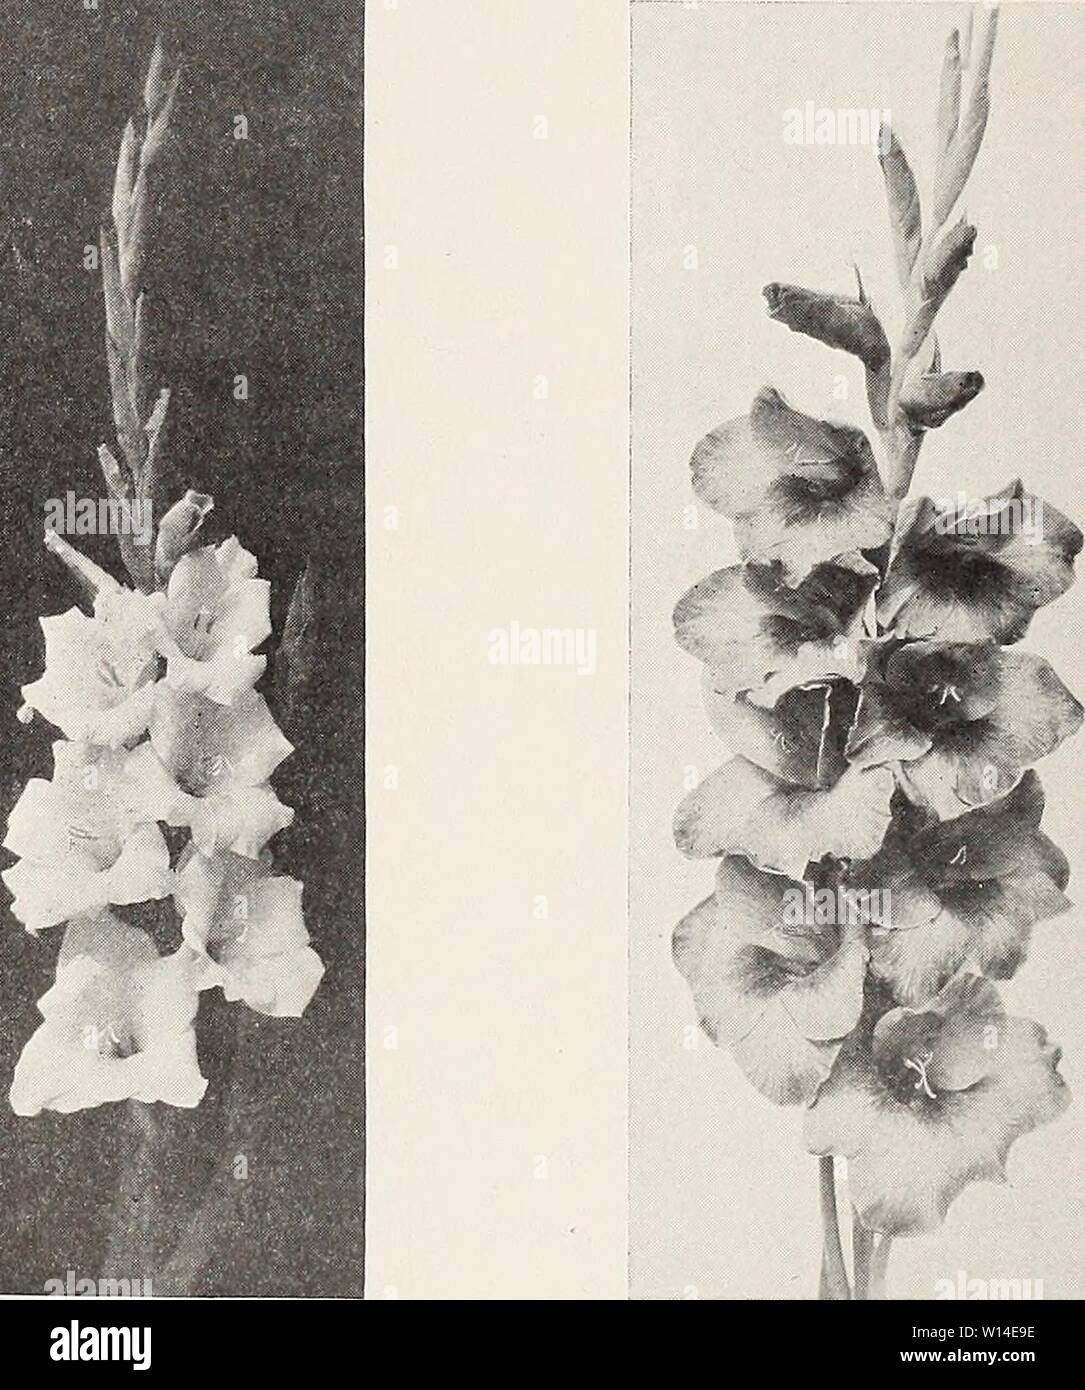 Archive image from page 11 of Descriptive list  gladiolus and. Descriptive list : gladiolus and delphiniums . descriptivelistg1928cham Year: 1928  Grow a Few Extra to Give Away E. G. HILL. (K) A true pink with cream throat. Several open. A fine one. Will make great commercial variety. E. J. SHAYLOR. (K) Very strong growing deep violet rose. Distinctive color. Fine commercial variety. One of the best. ELF. (D) White, lemon lip. Tall straight plant. Six to eight blooms open. One of the very best commercial whites. ELIZABETH GERBERDING. (D) Heavily ruffled dark shell pink, ruby and yellow throat. Stock Photo